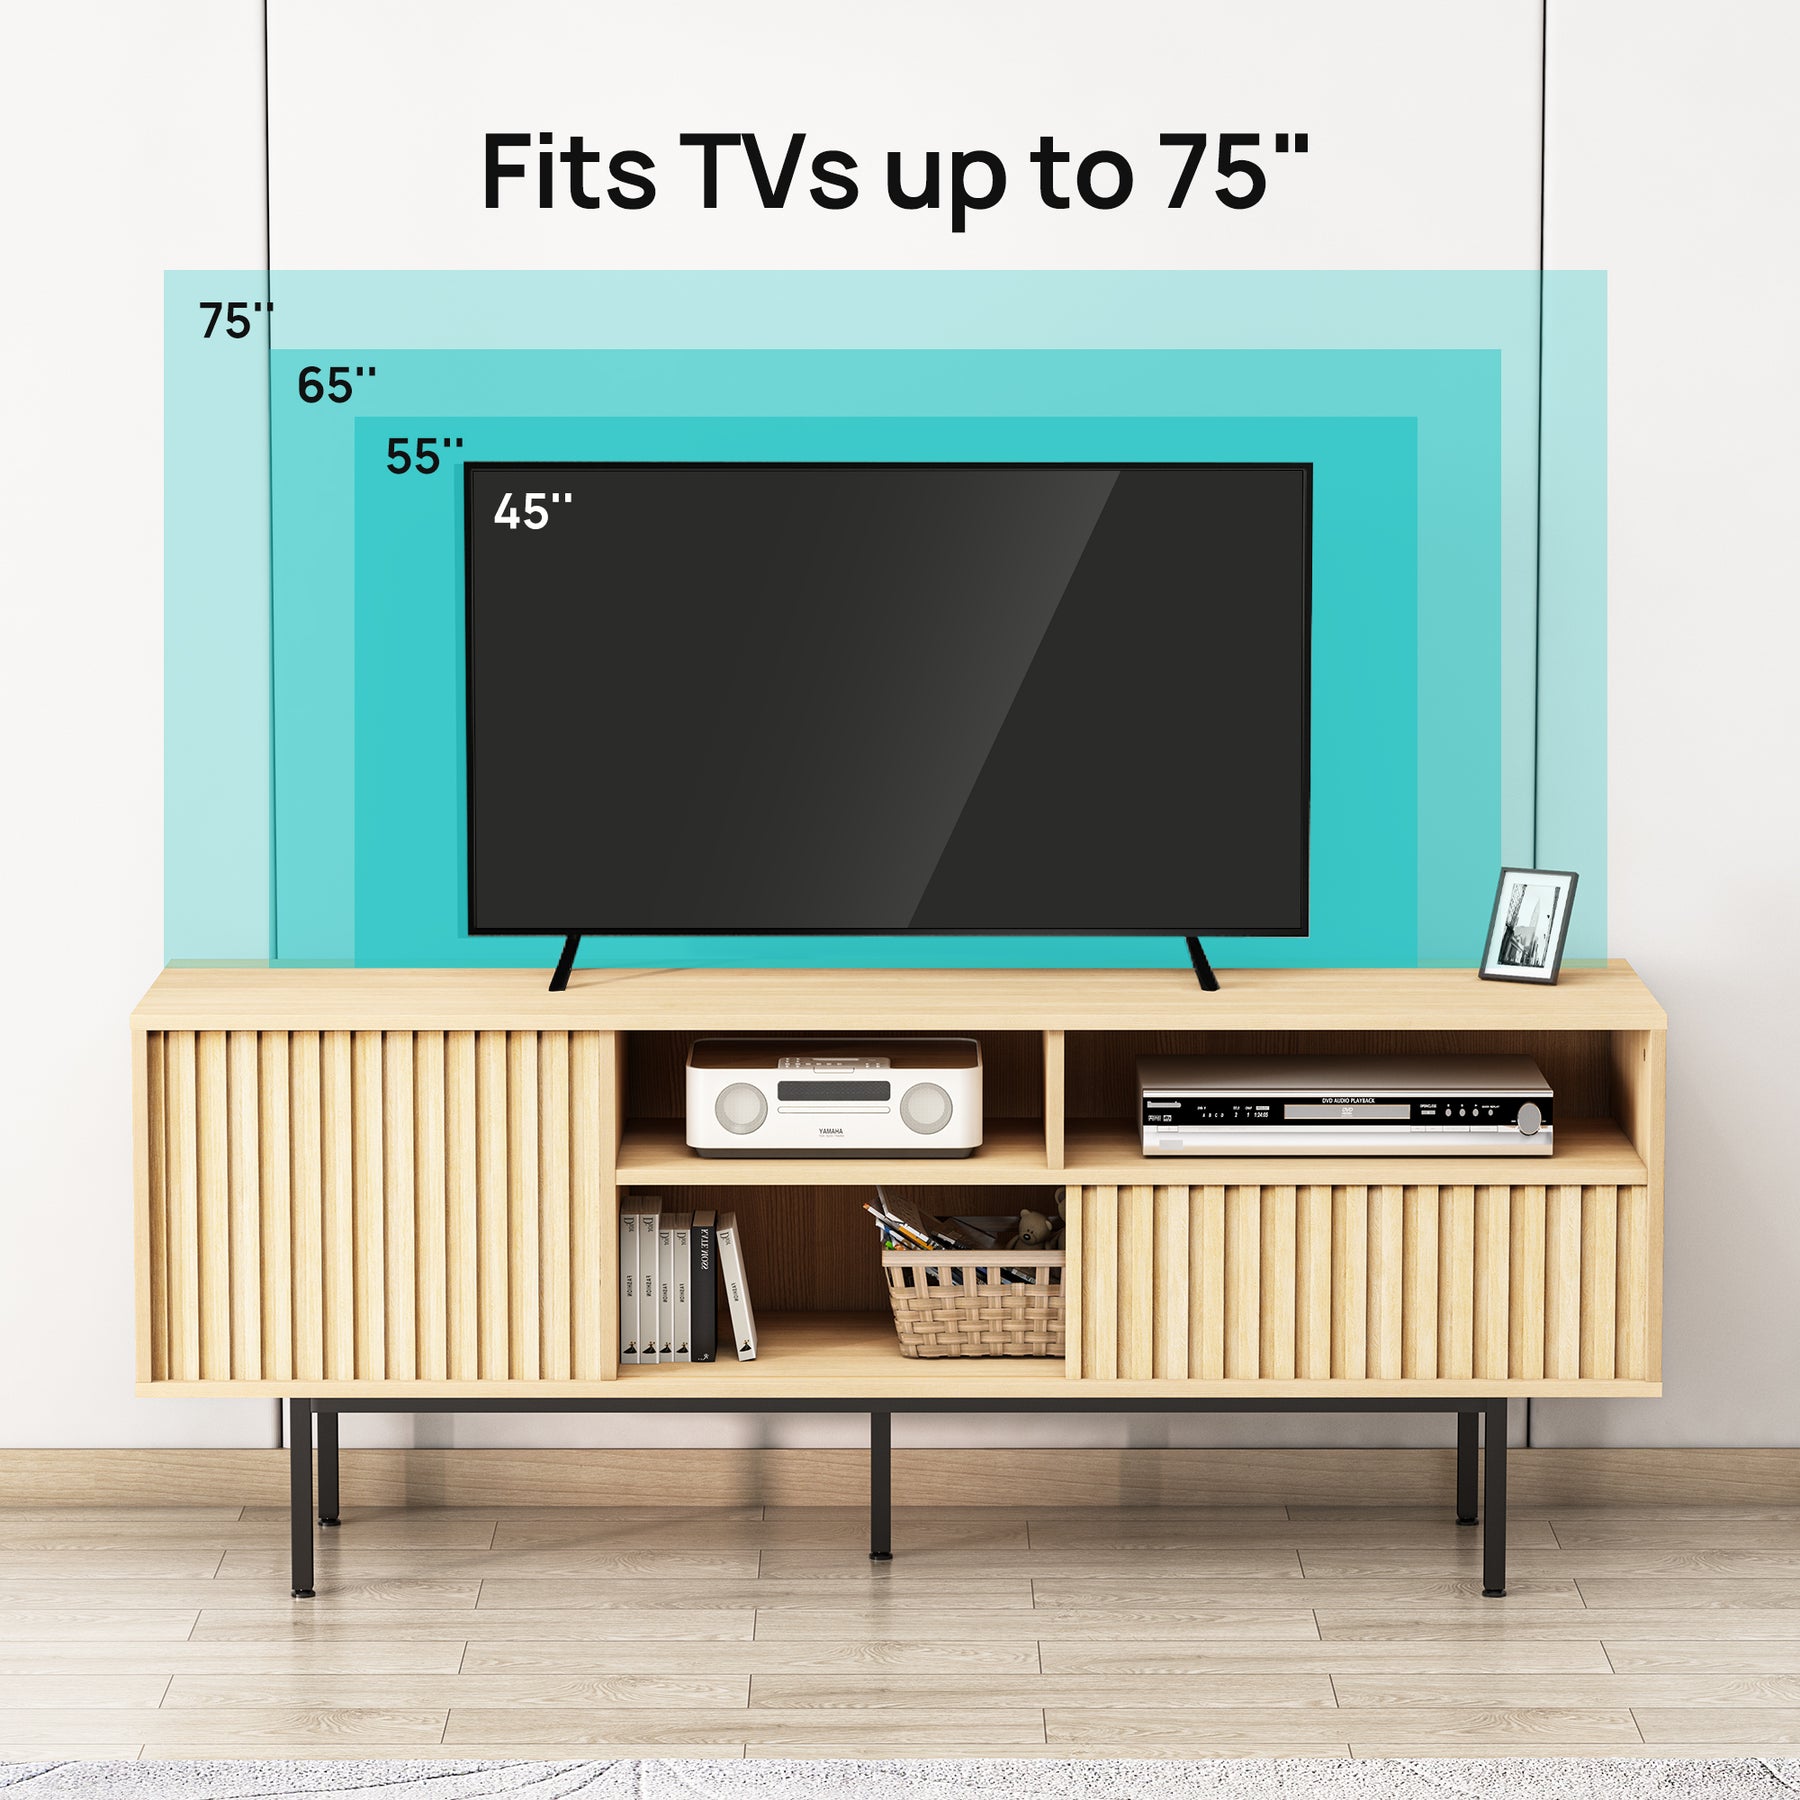 Evajoy TV Stand,Wood Entertainment Center with Storage Shelves Cabinet,59'' Mid Century Modern Television Stand